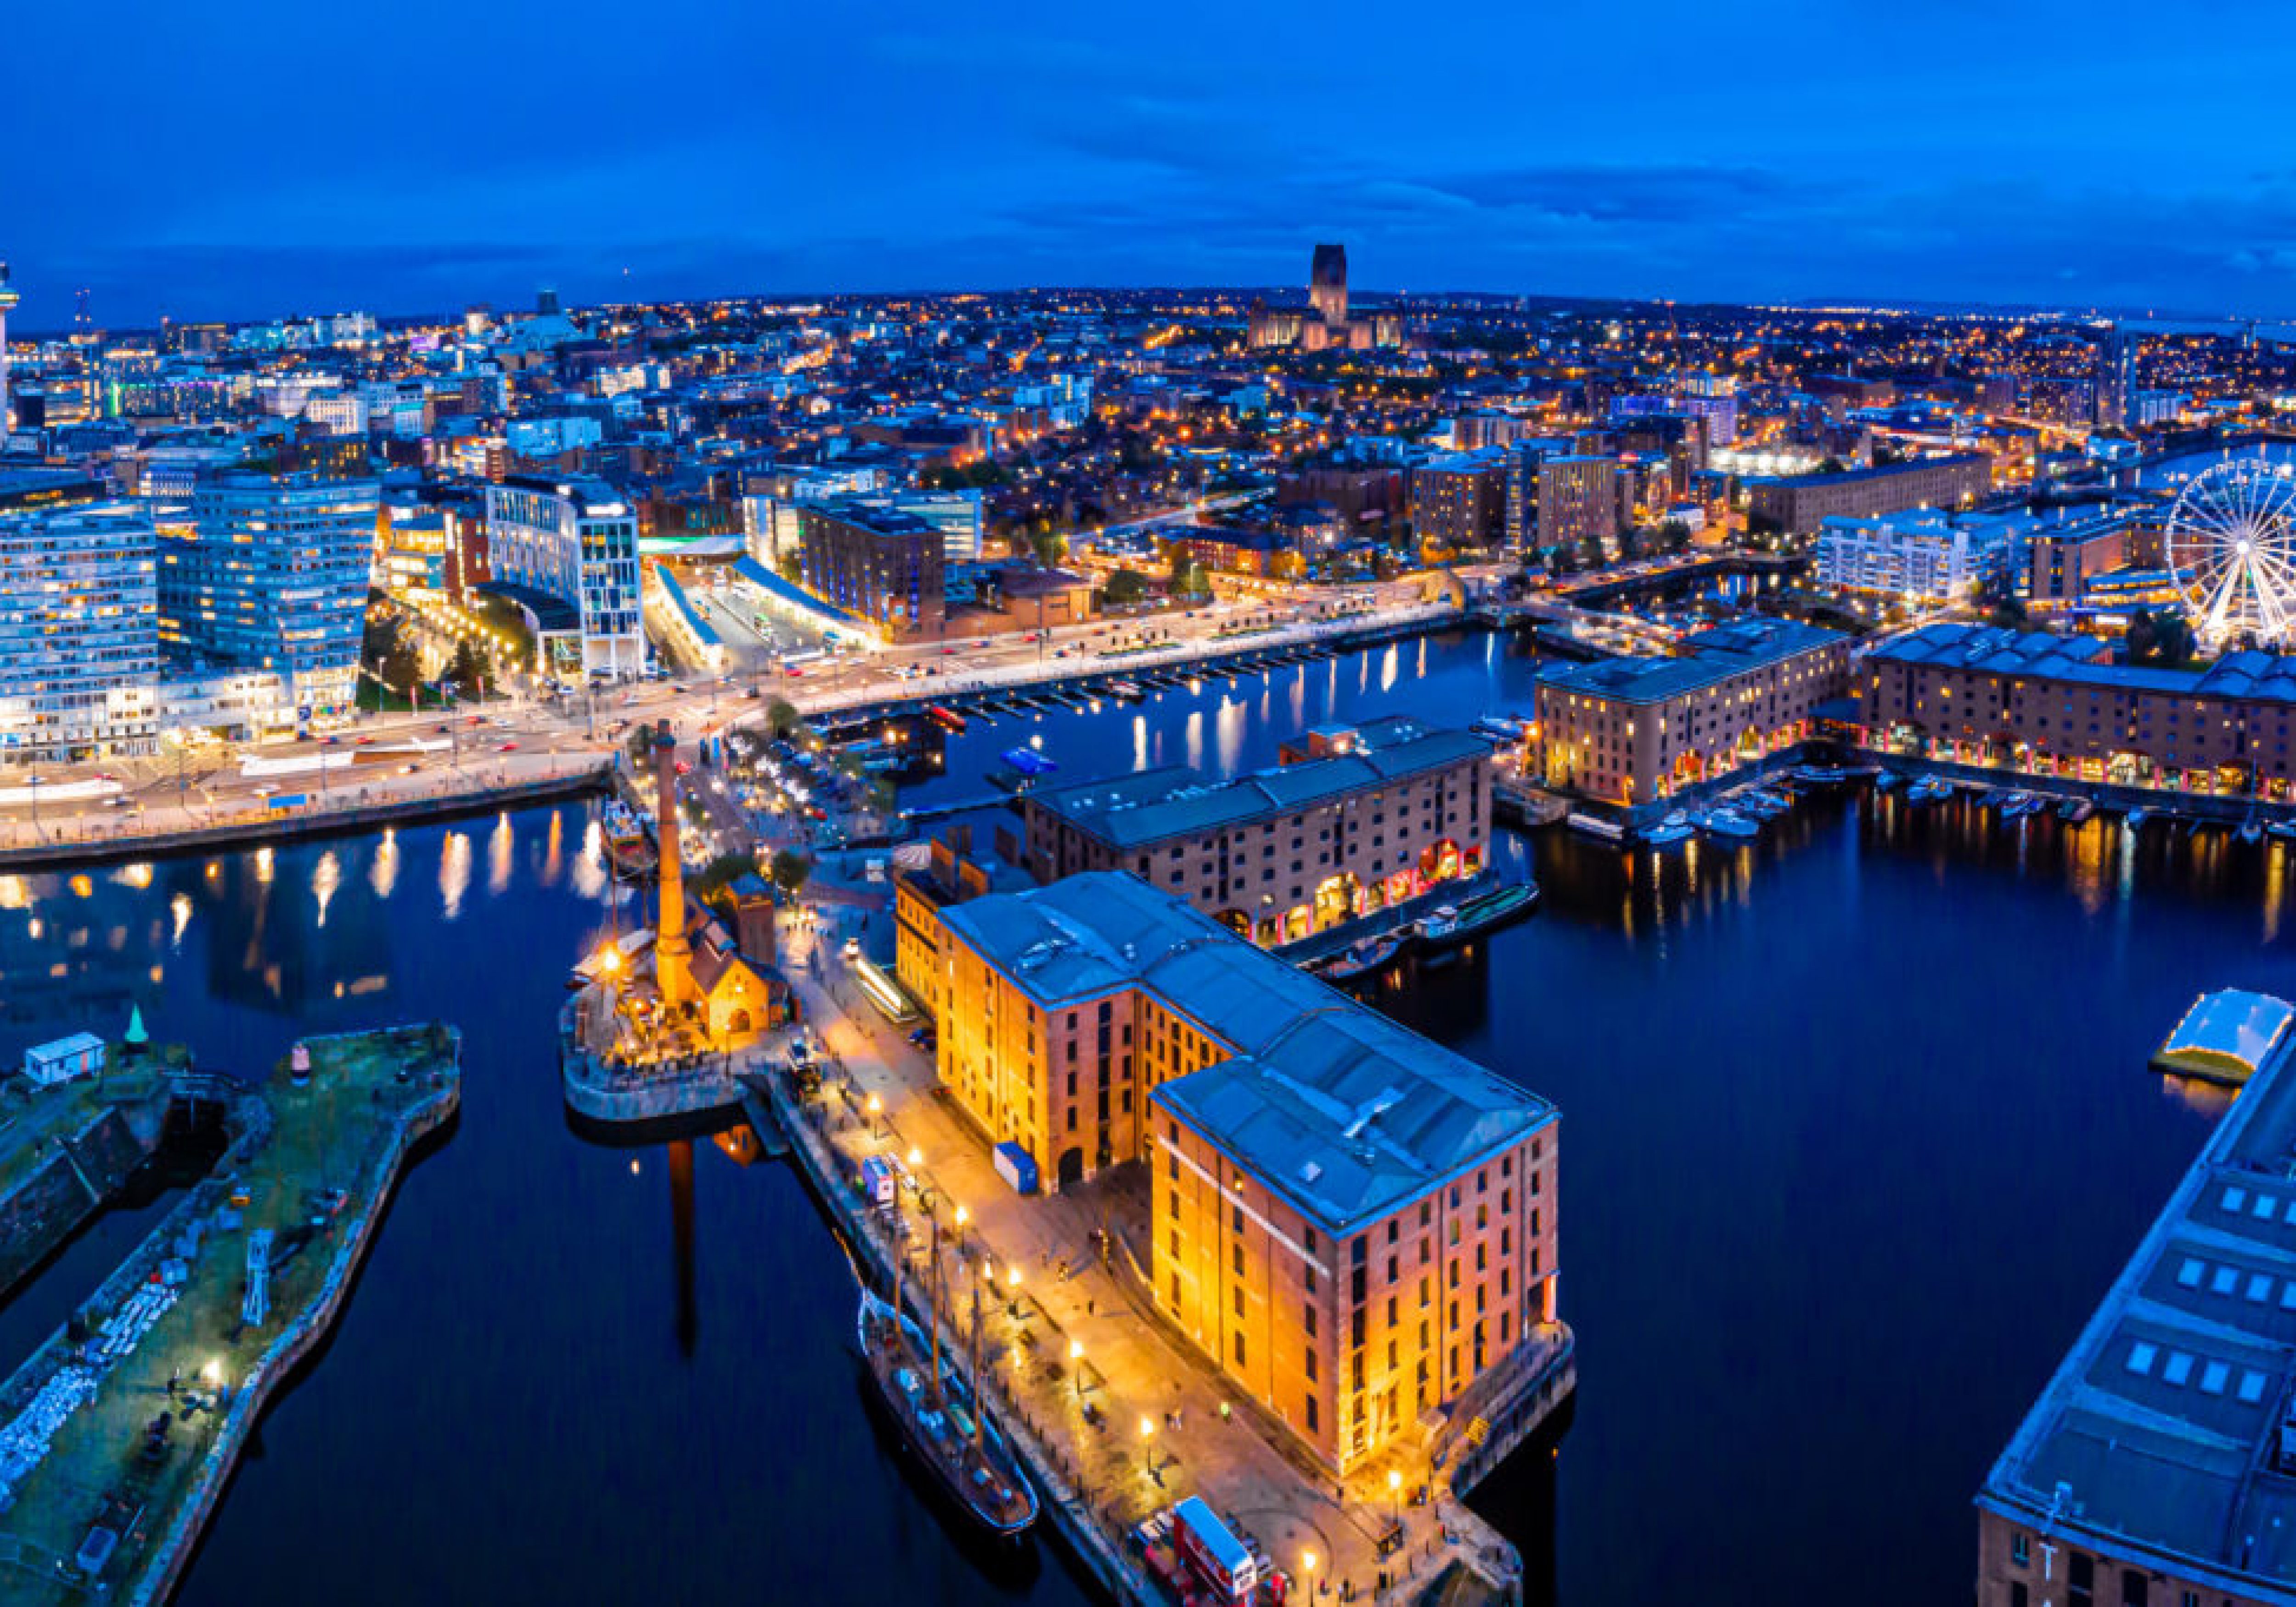 Aerial view of Royal Albert Dock in Liverpool, England